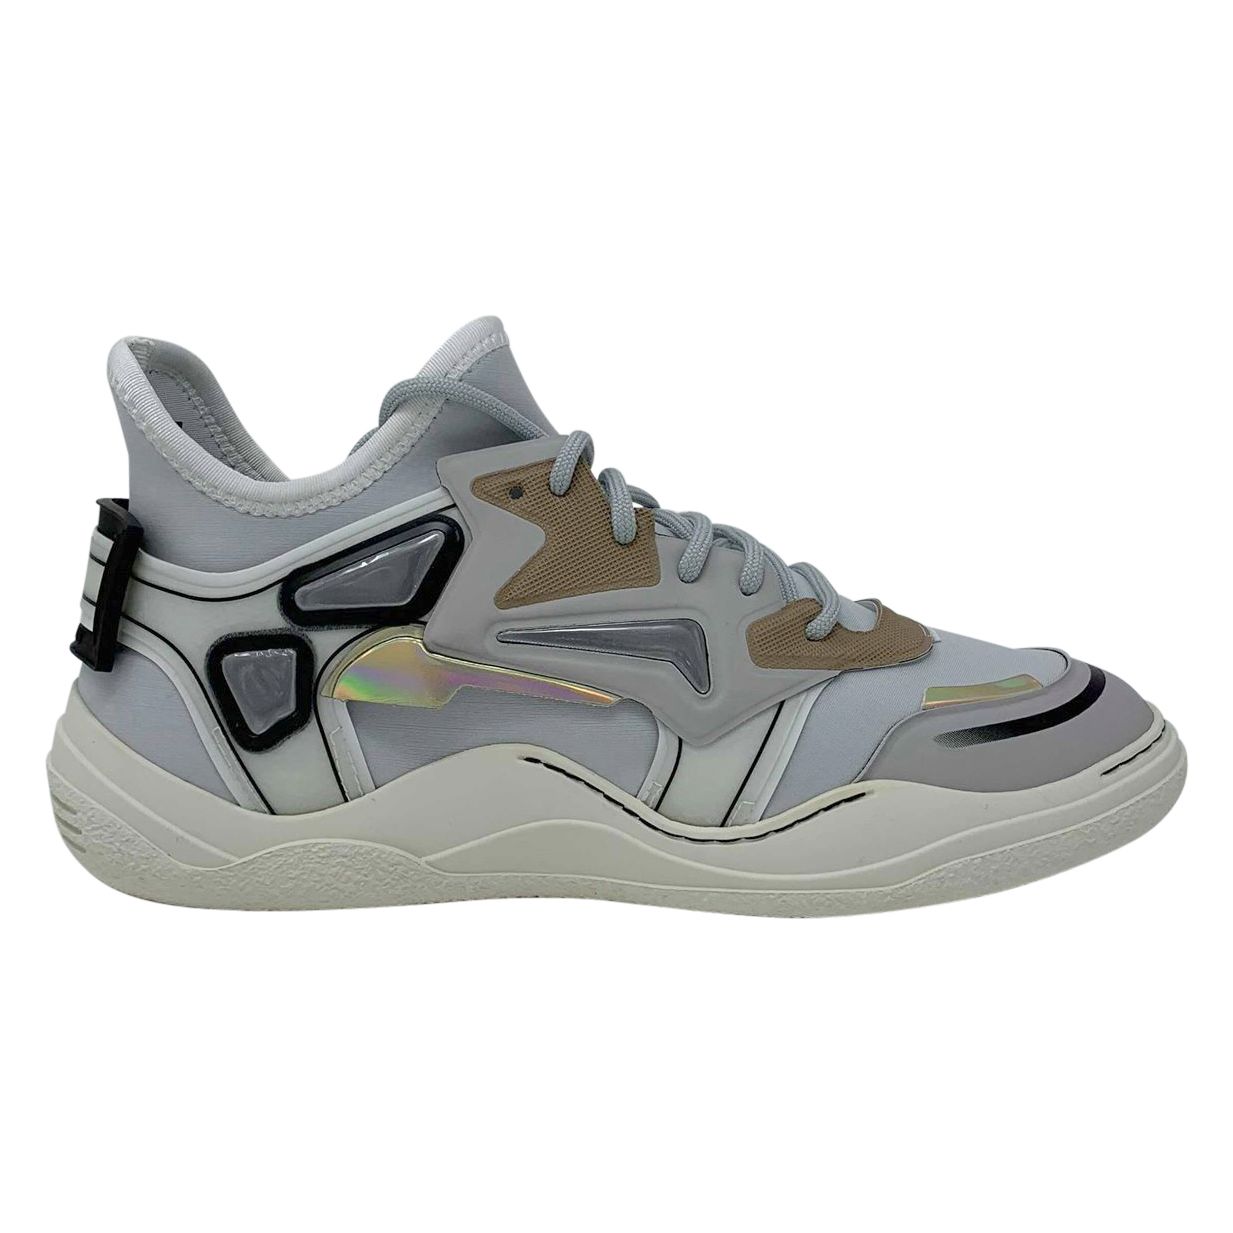 Lanvin Mid Top Neoprene Diving Sneaker FM-SKDMIN-NEOP-A18 Mens Trainers. 100% Nubuck Calfskin Leather. Rubber Sole. Mid-top white and light grey Diving sneaker. Code:  FM-SKDMIN-NEOP-A18. Light Grey Lanvin Trainer